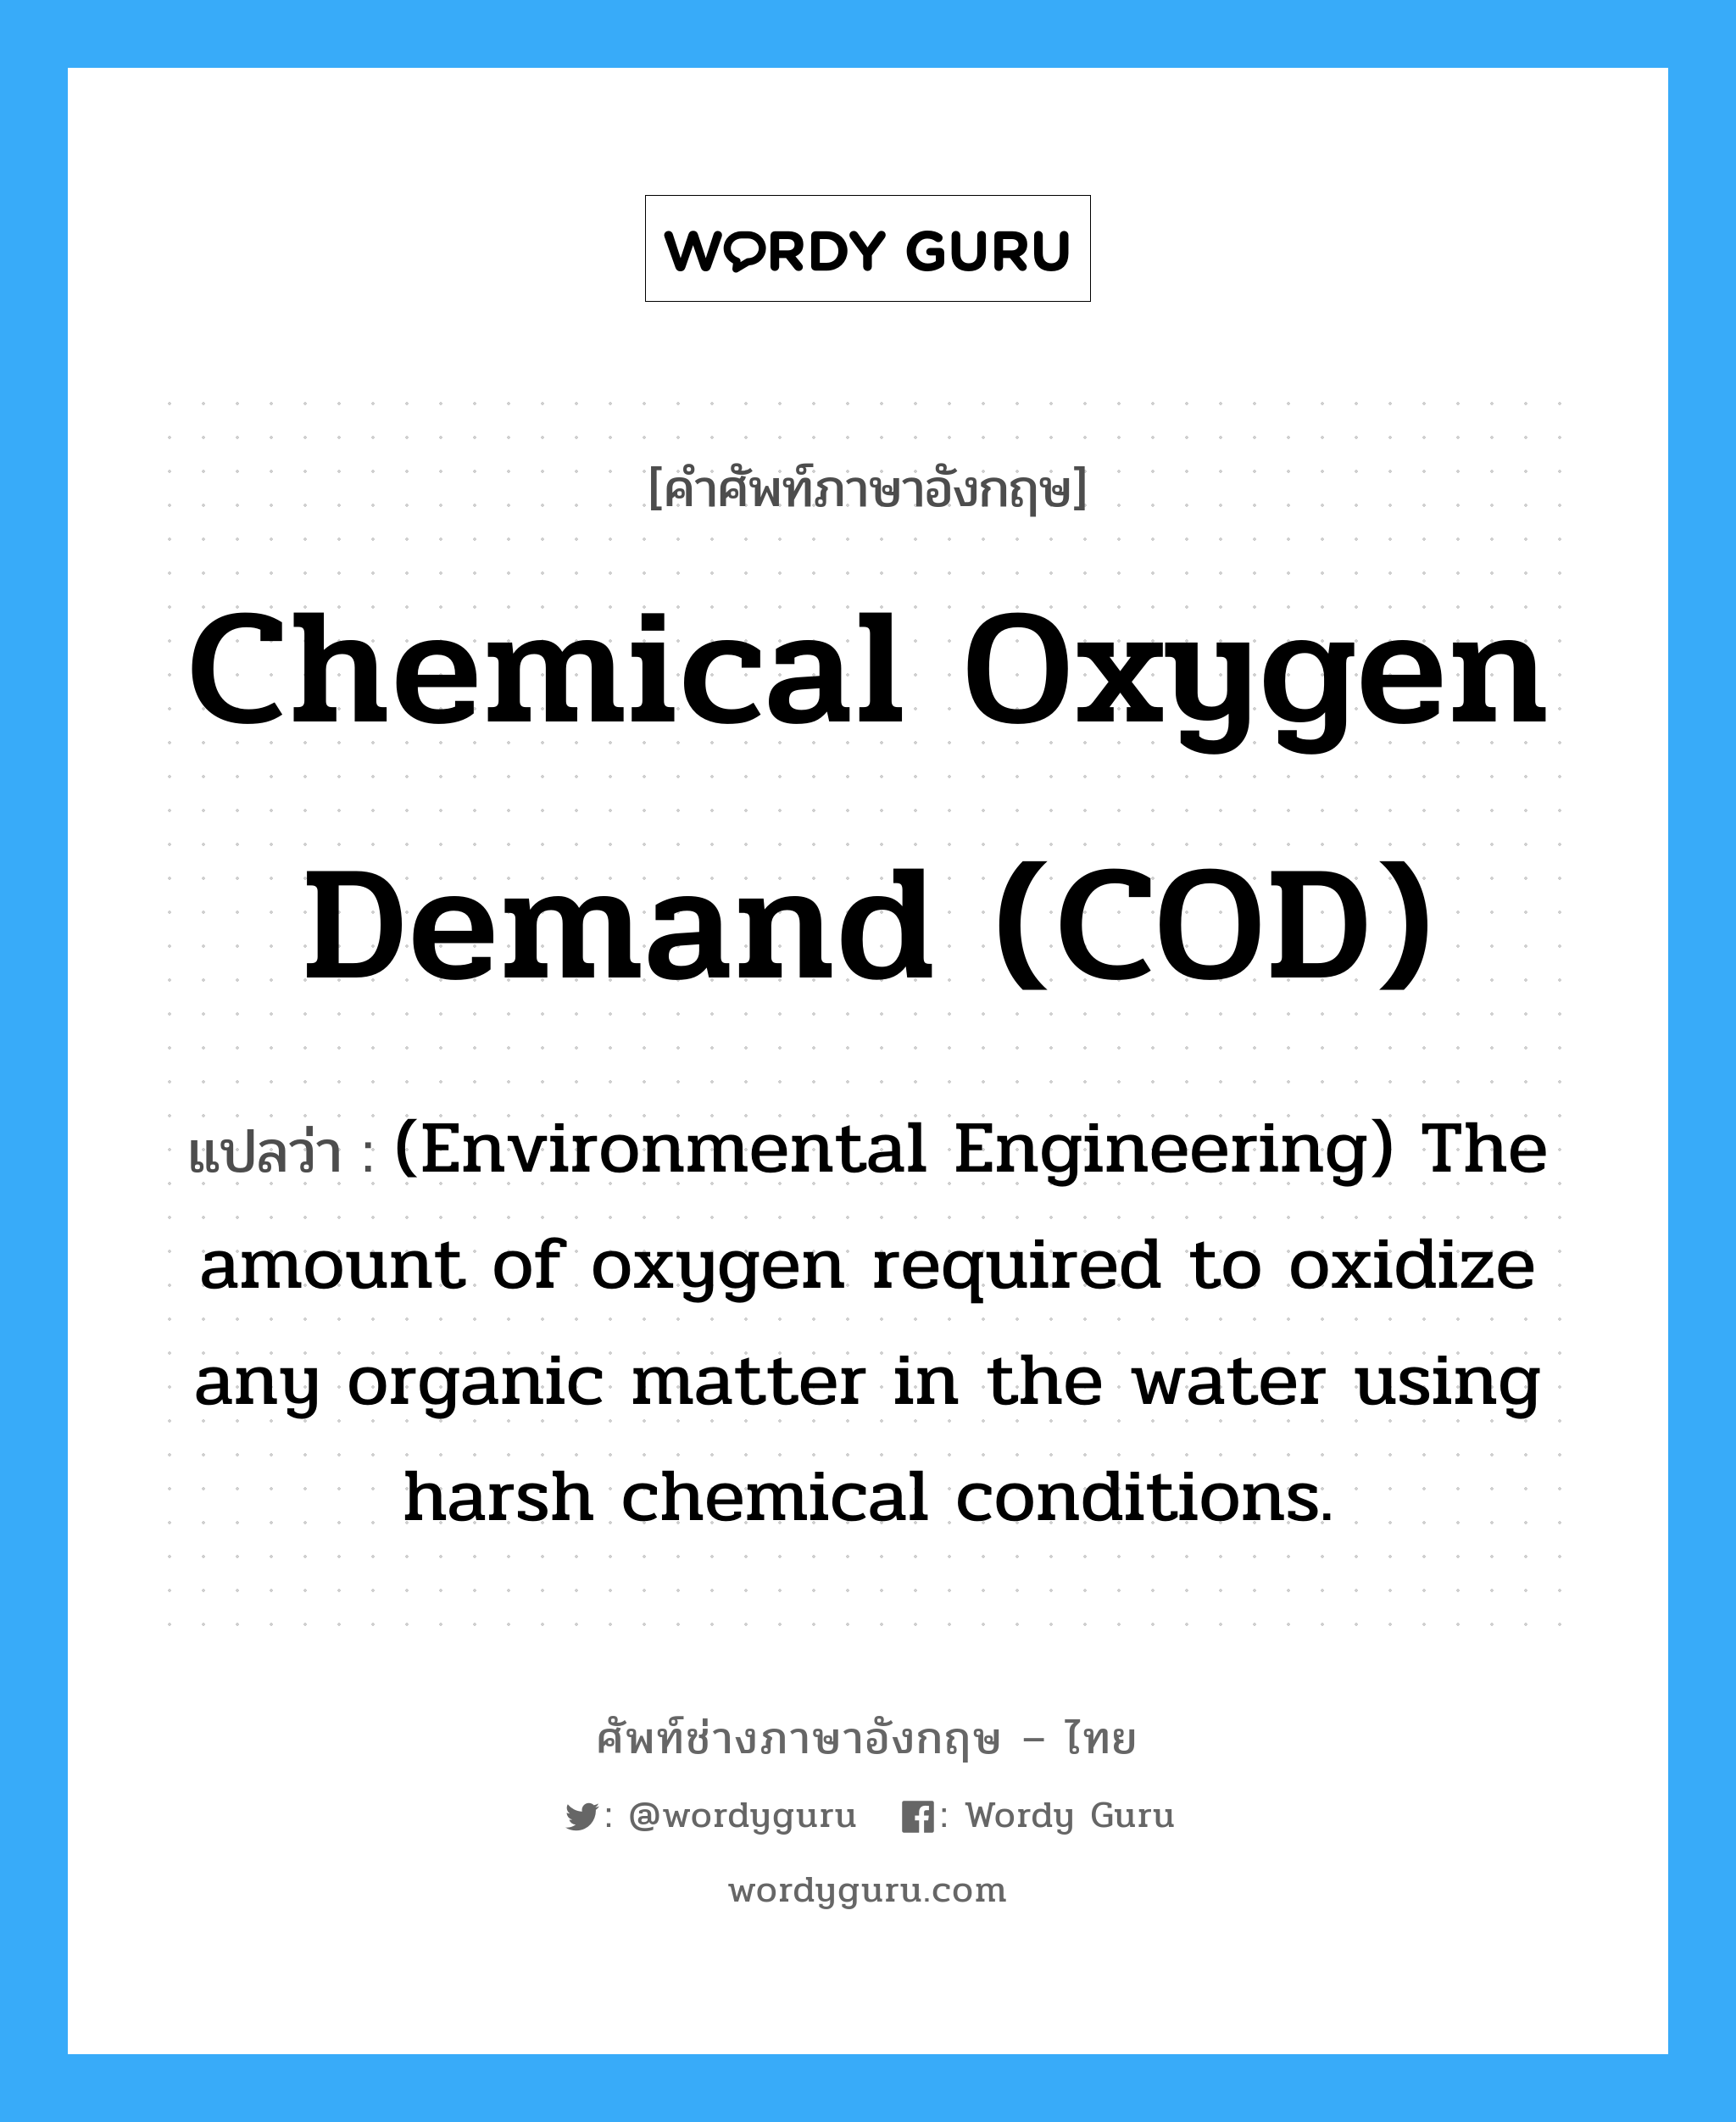 Chemical oxygen demand (COD) แปลว่า?, คำศัพท์ช่างภาษาอังกฤษ - ไทย Chemical oxygen demand (COD) คำศัพท์ภาษาอังกฤษ Chemical oxygen demand (COD) แปลว่า (Environmental Engineering) The amount of oxygen required to oxidize any organic matter in the water using harsh chemical conditions.